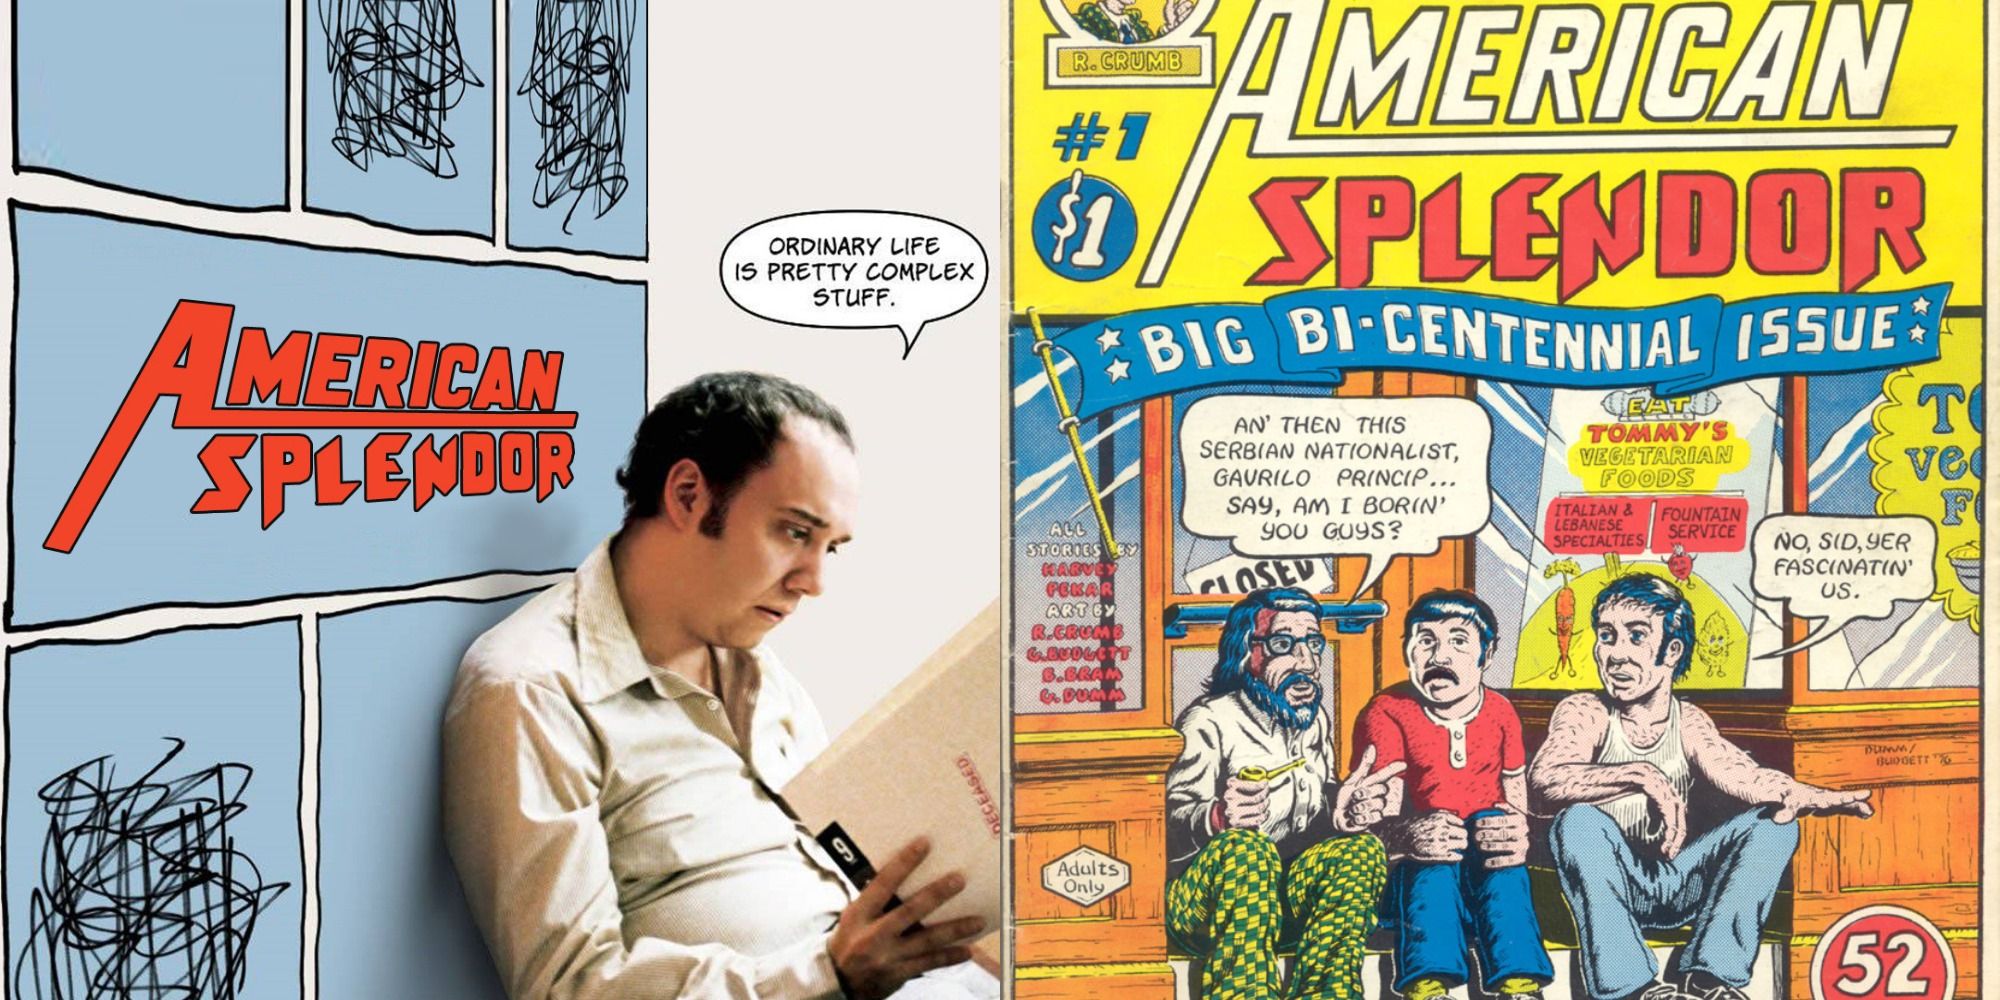 combined image of Paul Giamatti on the poster of American Splendor and the comic it is based on